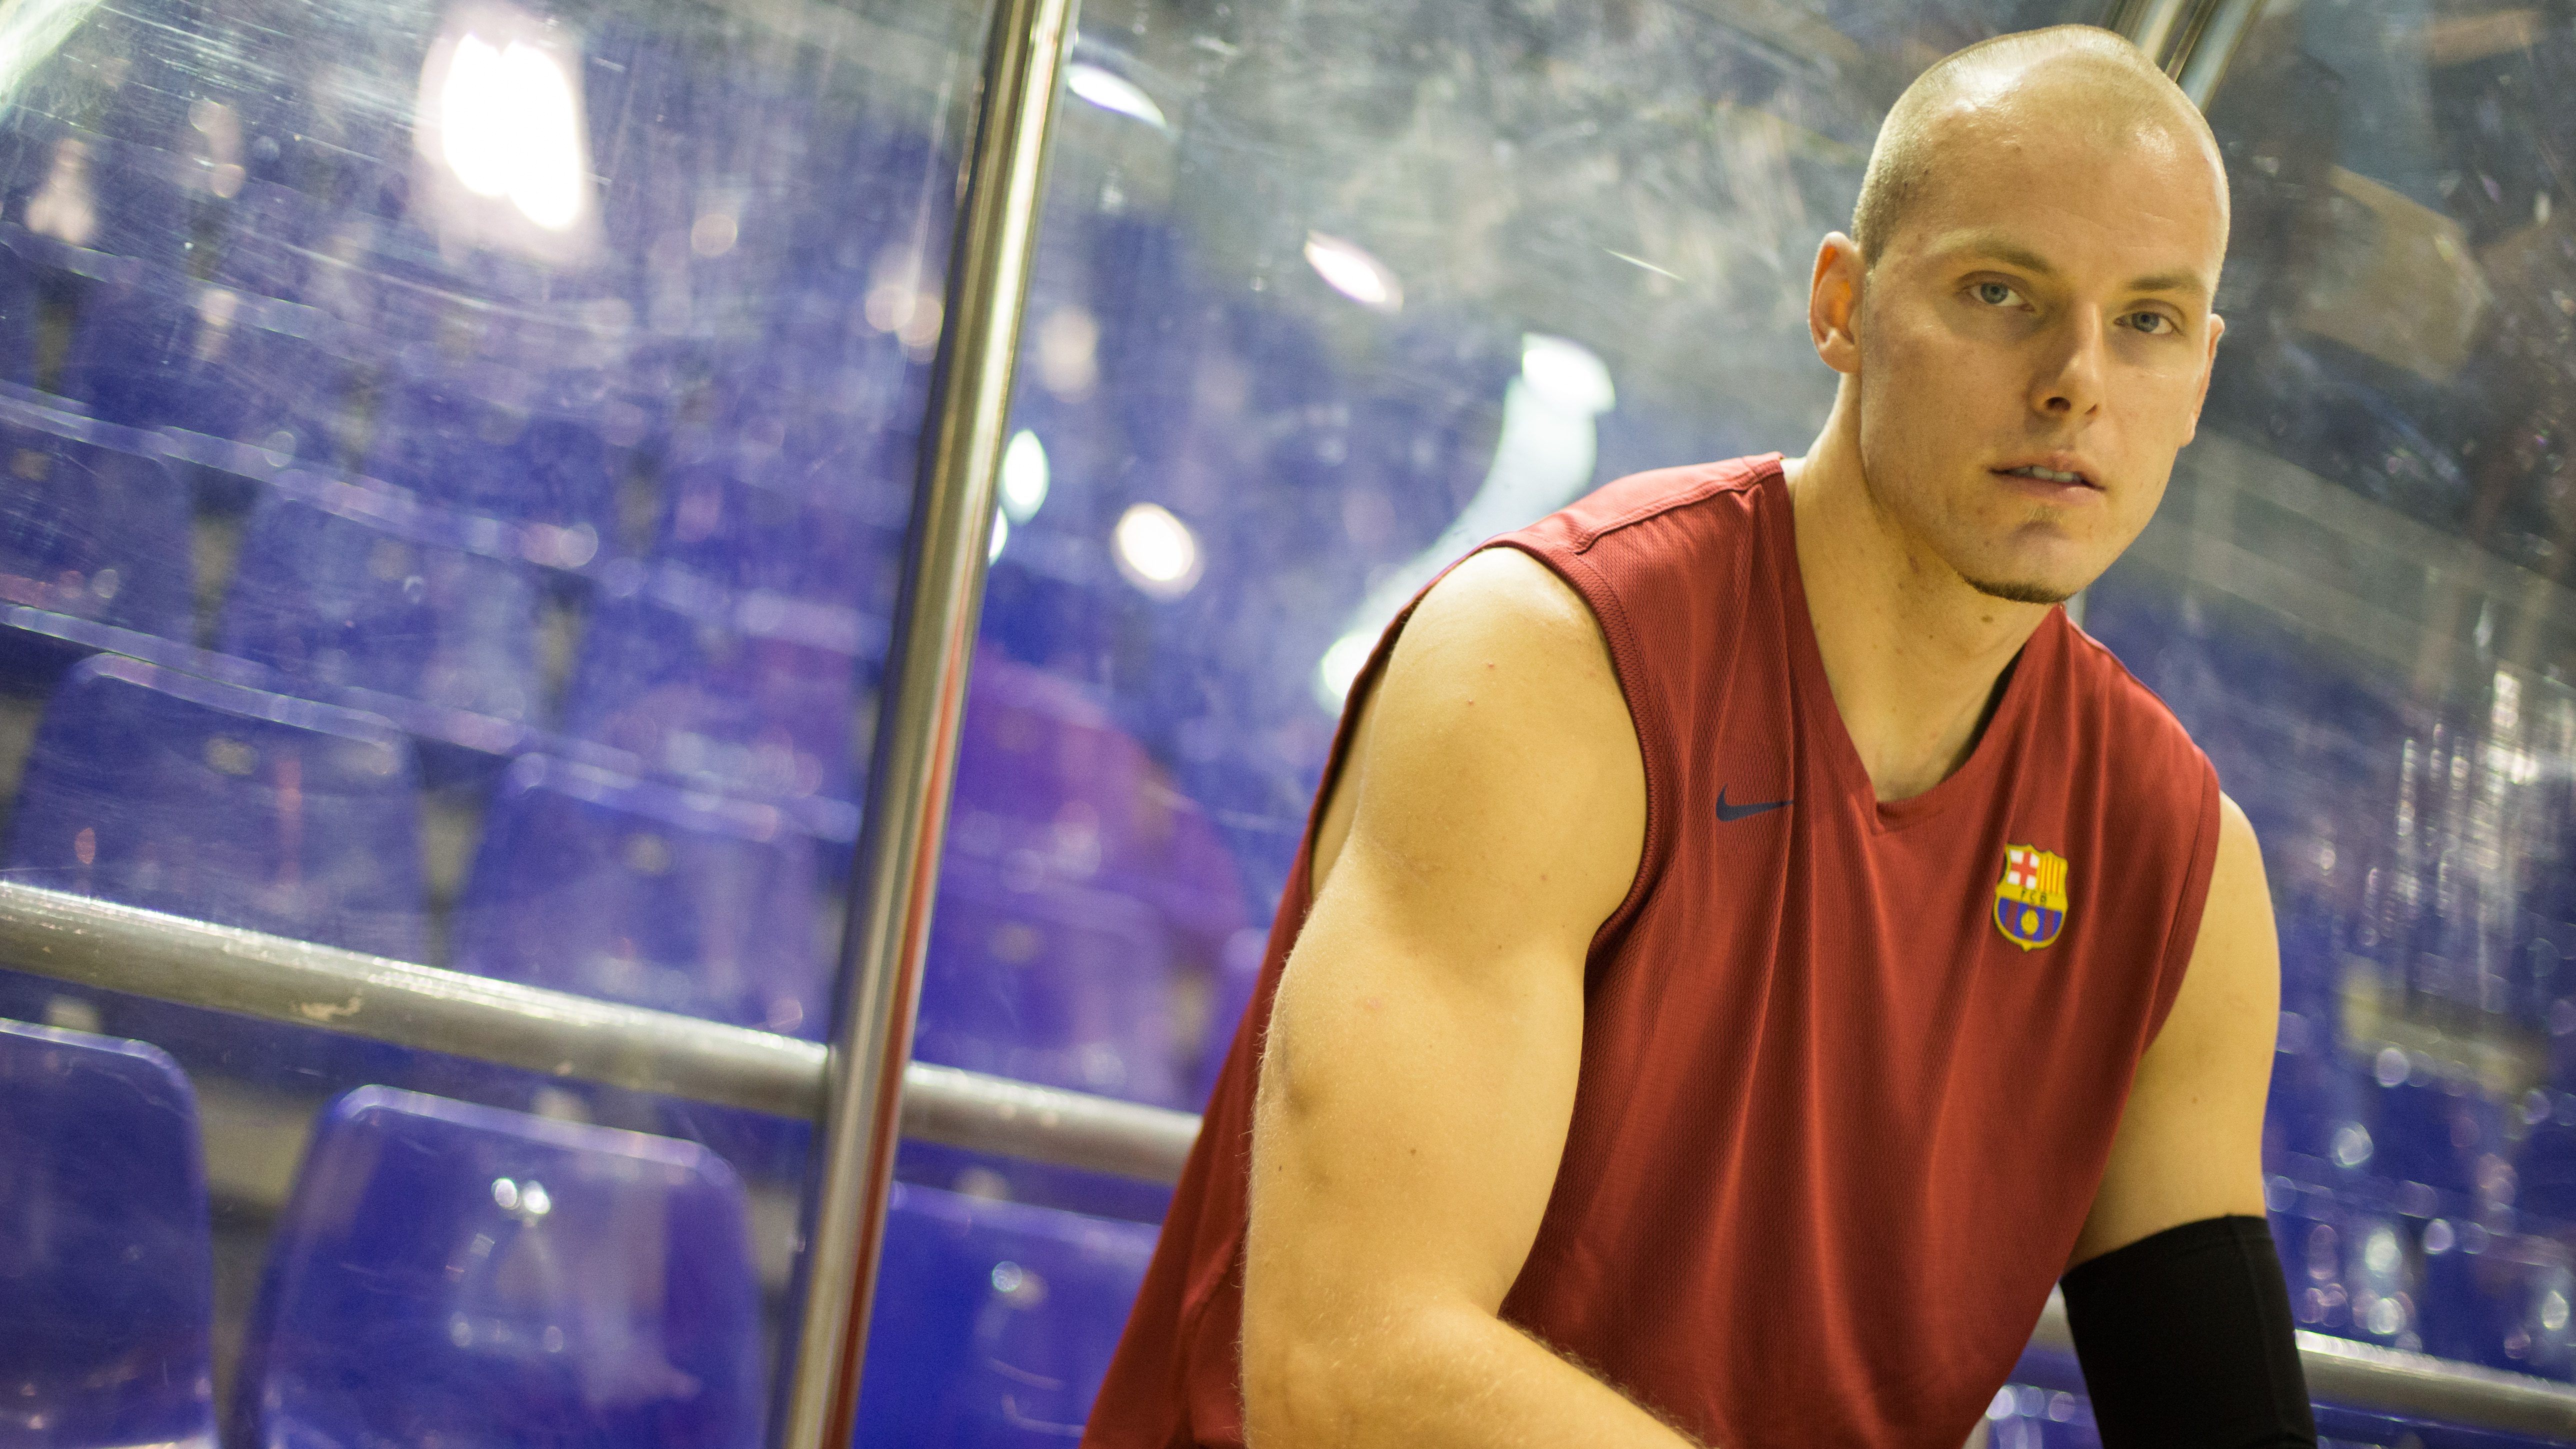 Maciej Lampe: “I encourage fans to come to the Palau, are going to see top-notch basketball”